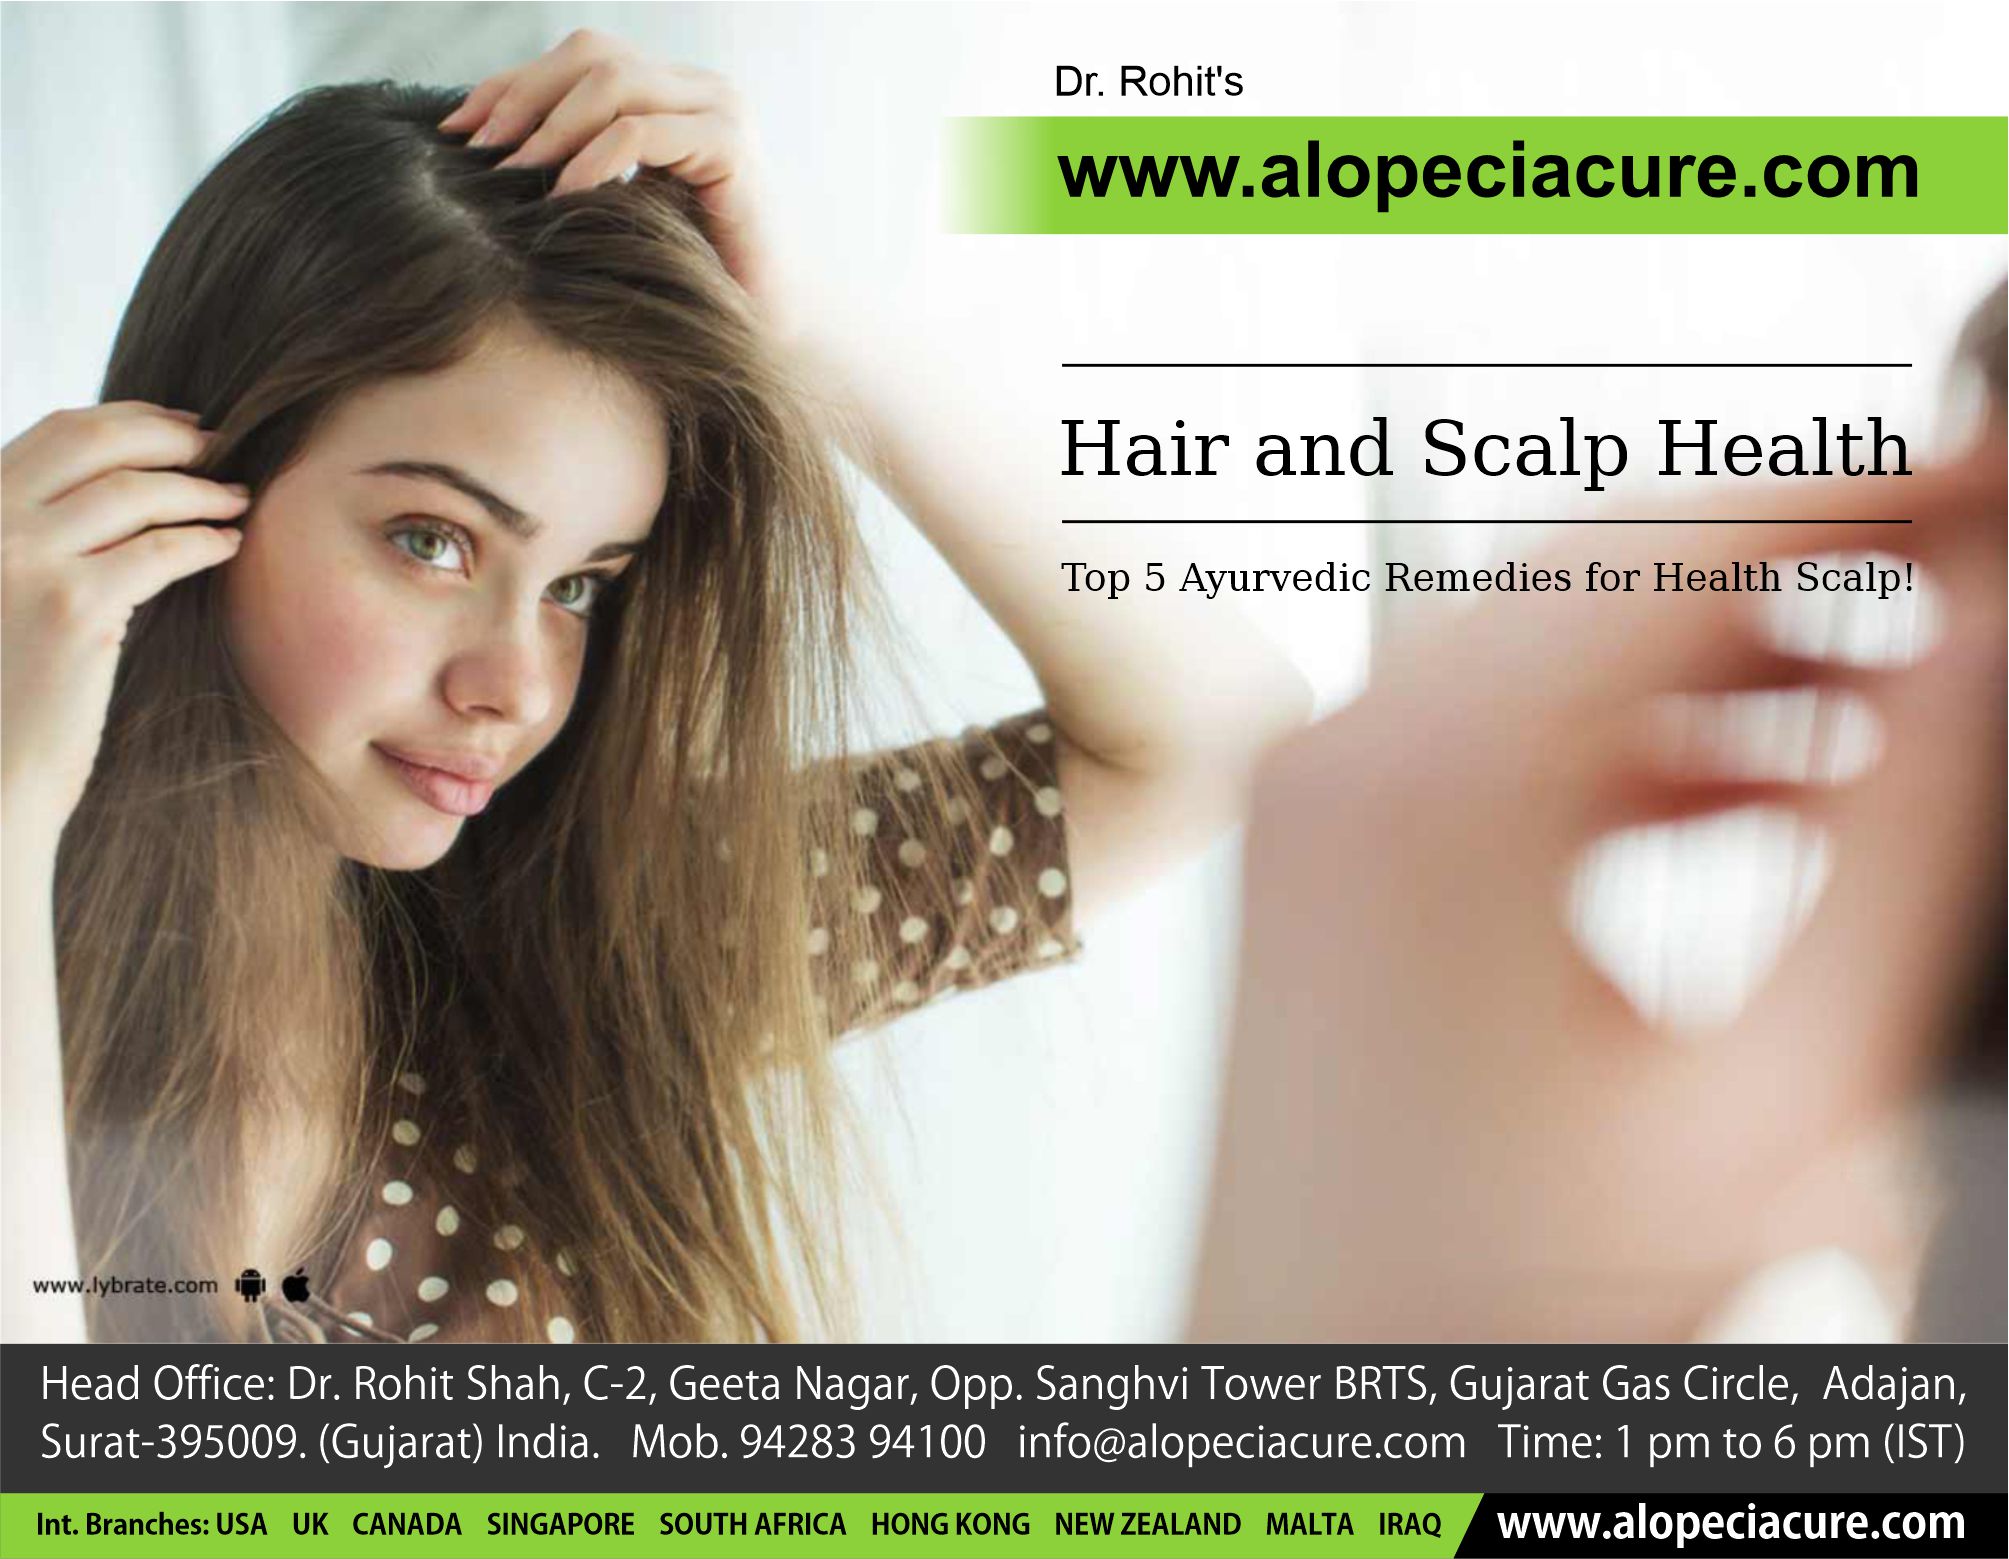 Hair and Scalp Health - Top 5 Ayurvedic Remedies for Healthy Scalp!